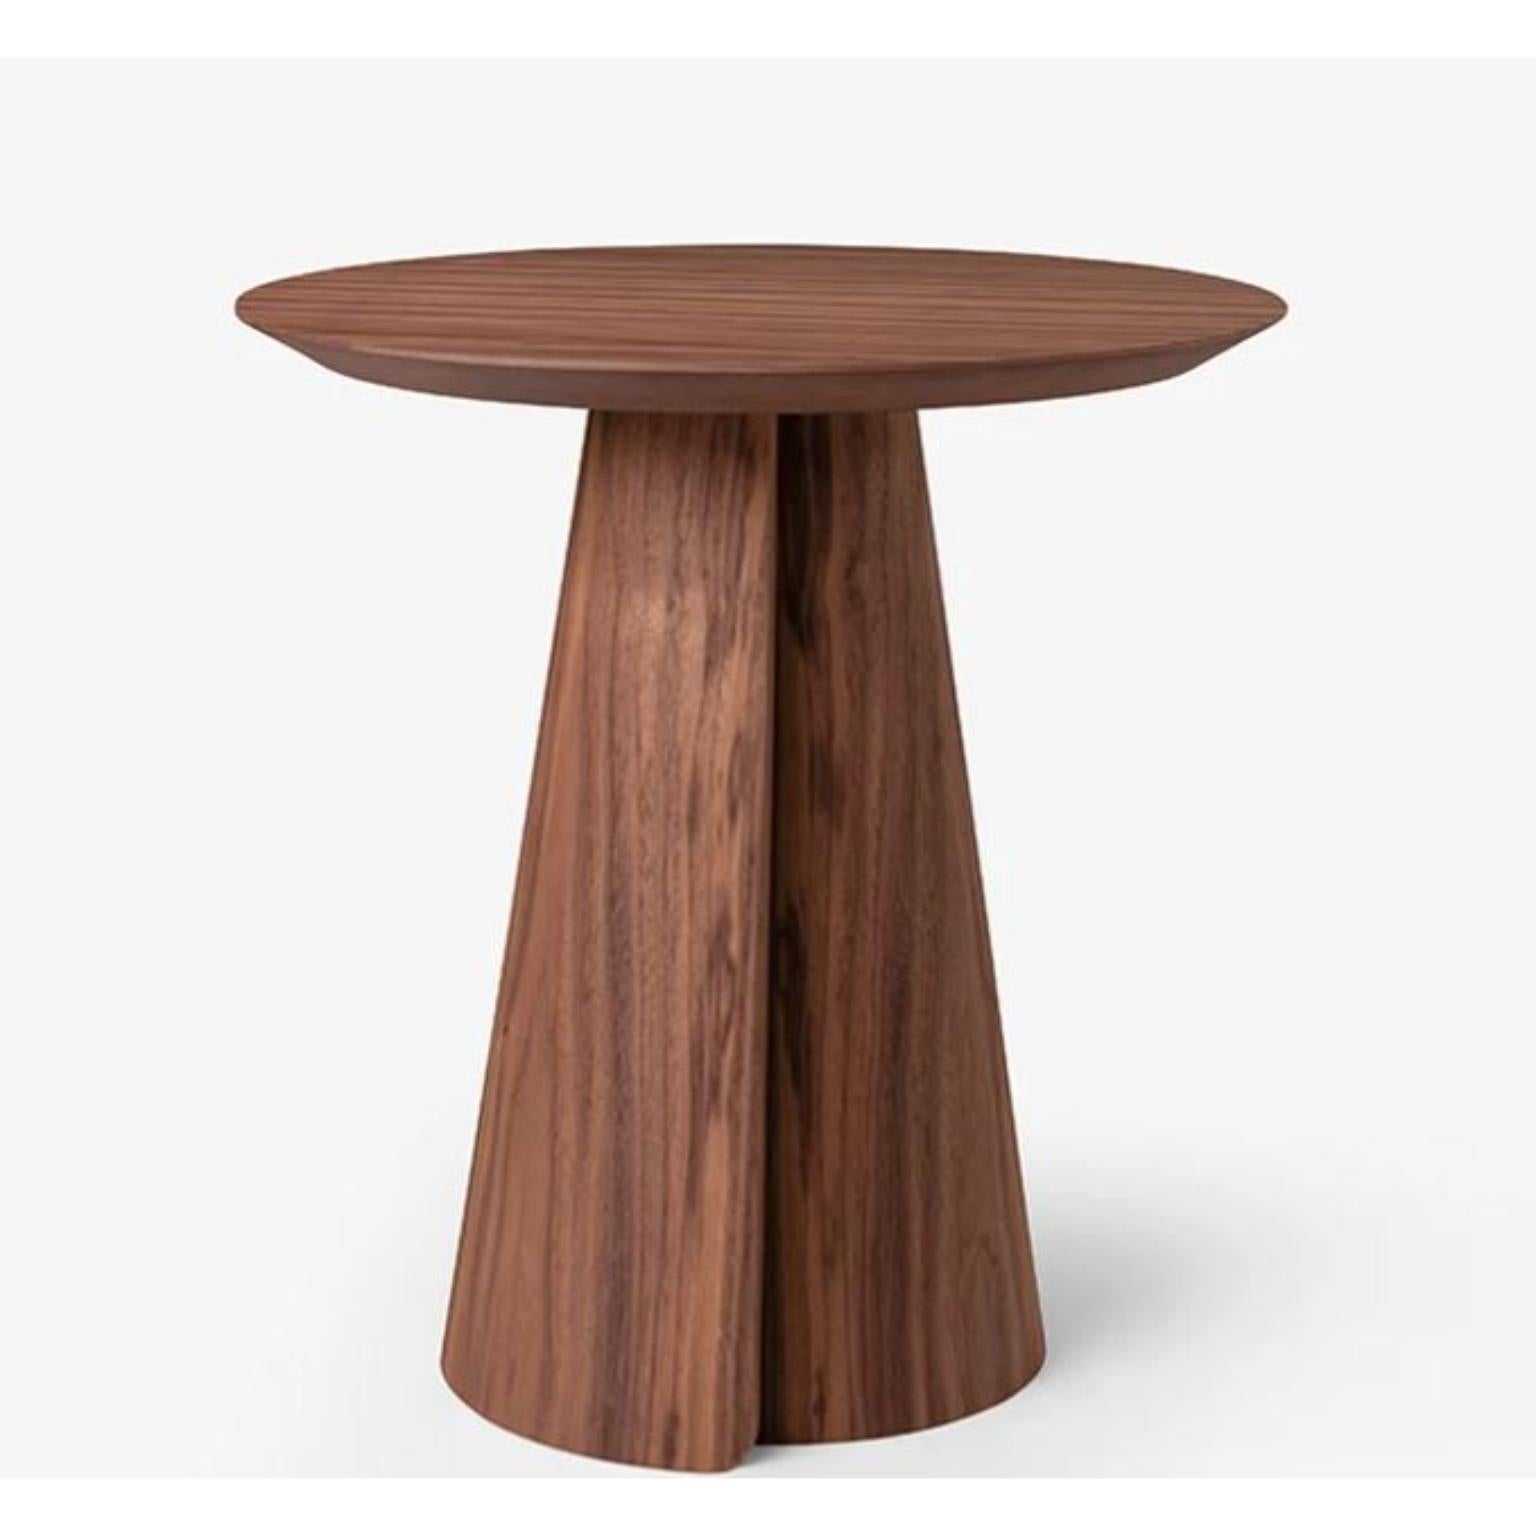 Volta Side Table 50 by Wentz
Dimensions: D 50 x W 50 x H 55 cm
Materials: Wood, Plywood, MDF, Veneer, Steel


The Volta table references nature in its impermanence. The detail on the base suggests natural movements and refers to nature's